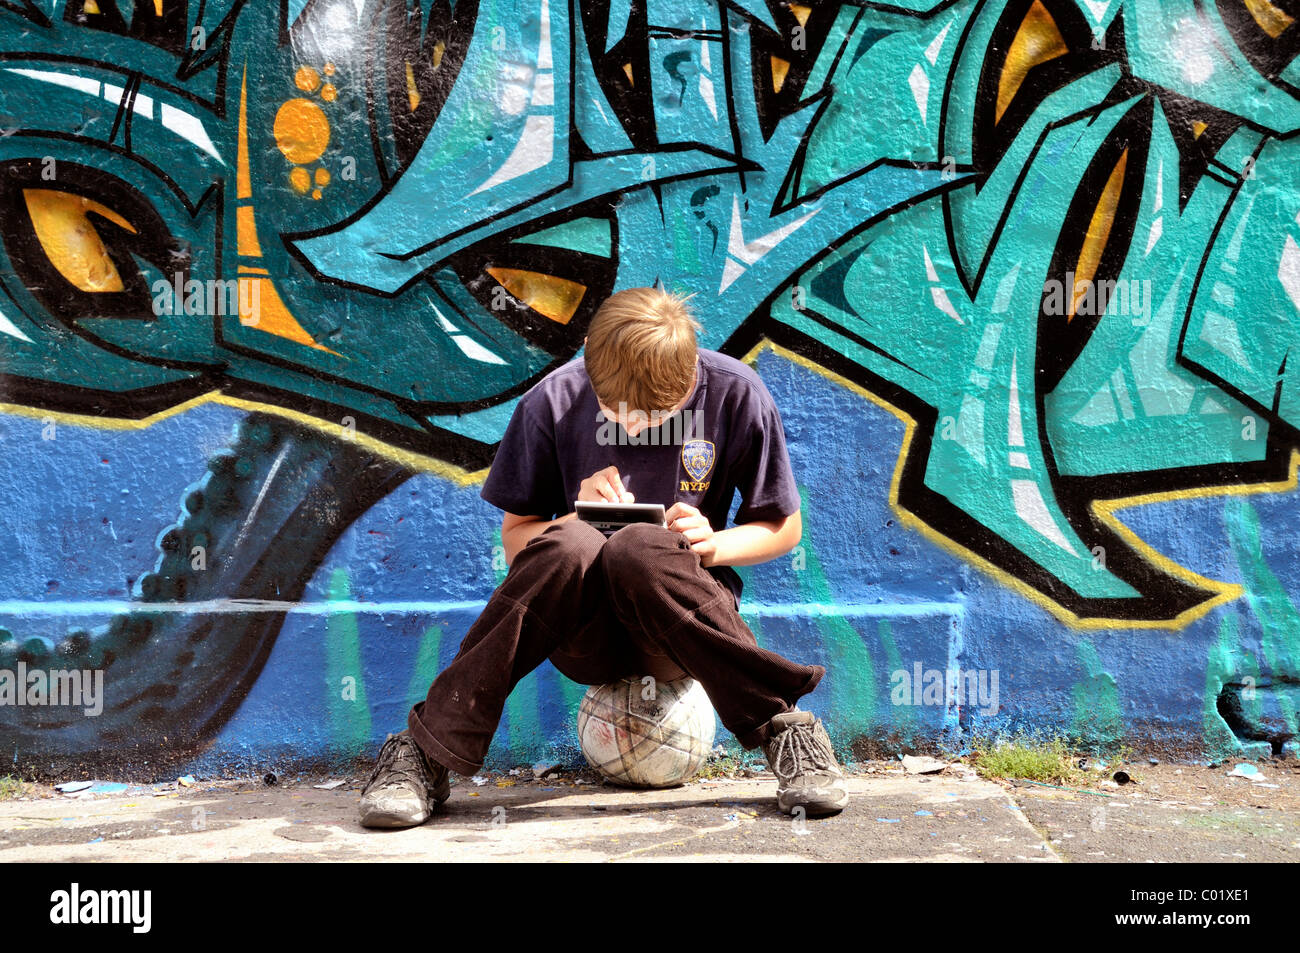 Ten-year-old boy playing with his Nintendo in front of a graffiti wall, Germany, Europe Stock Photo